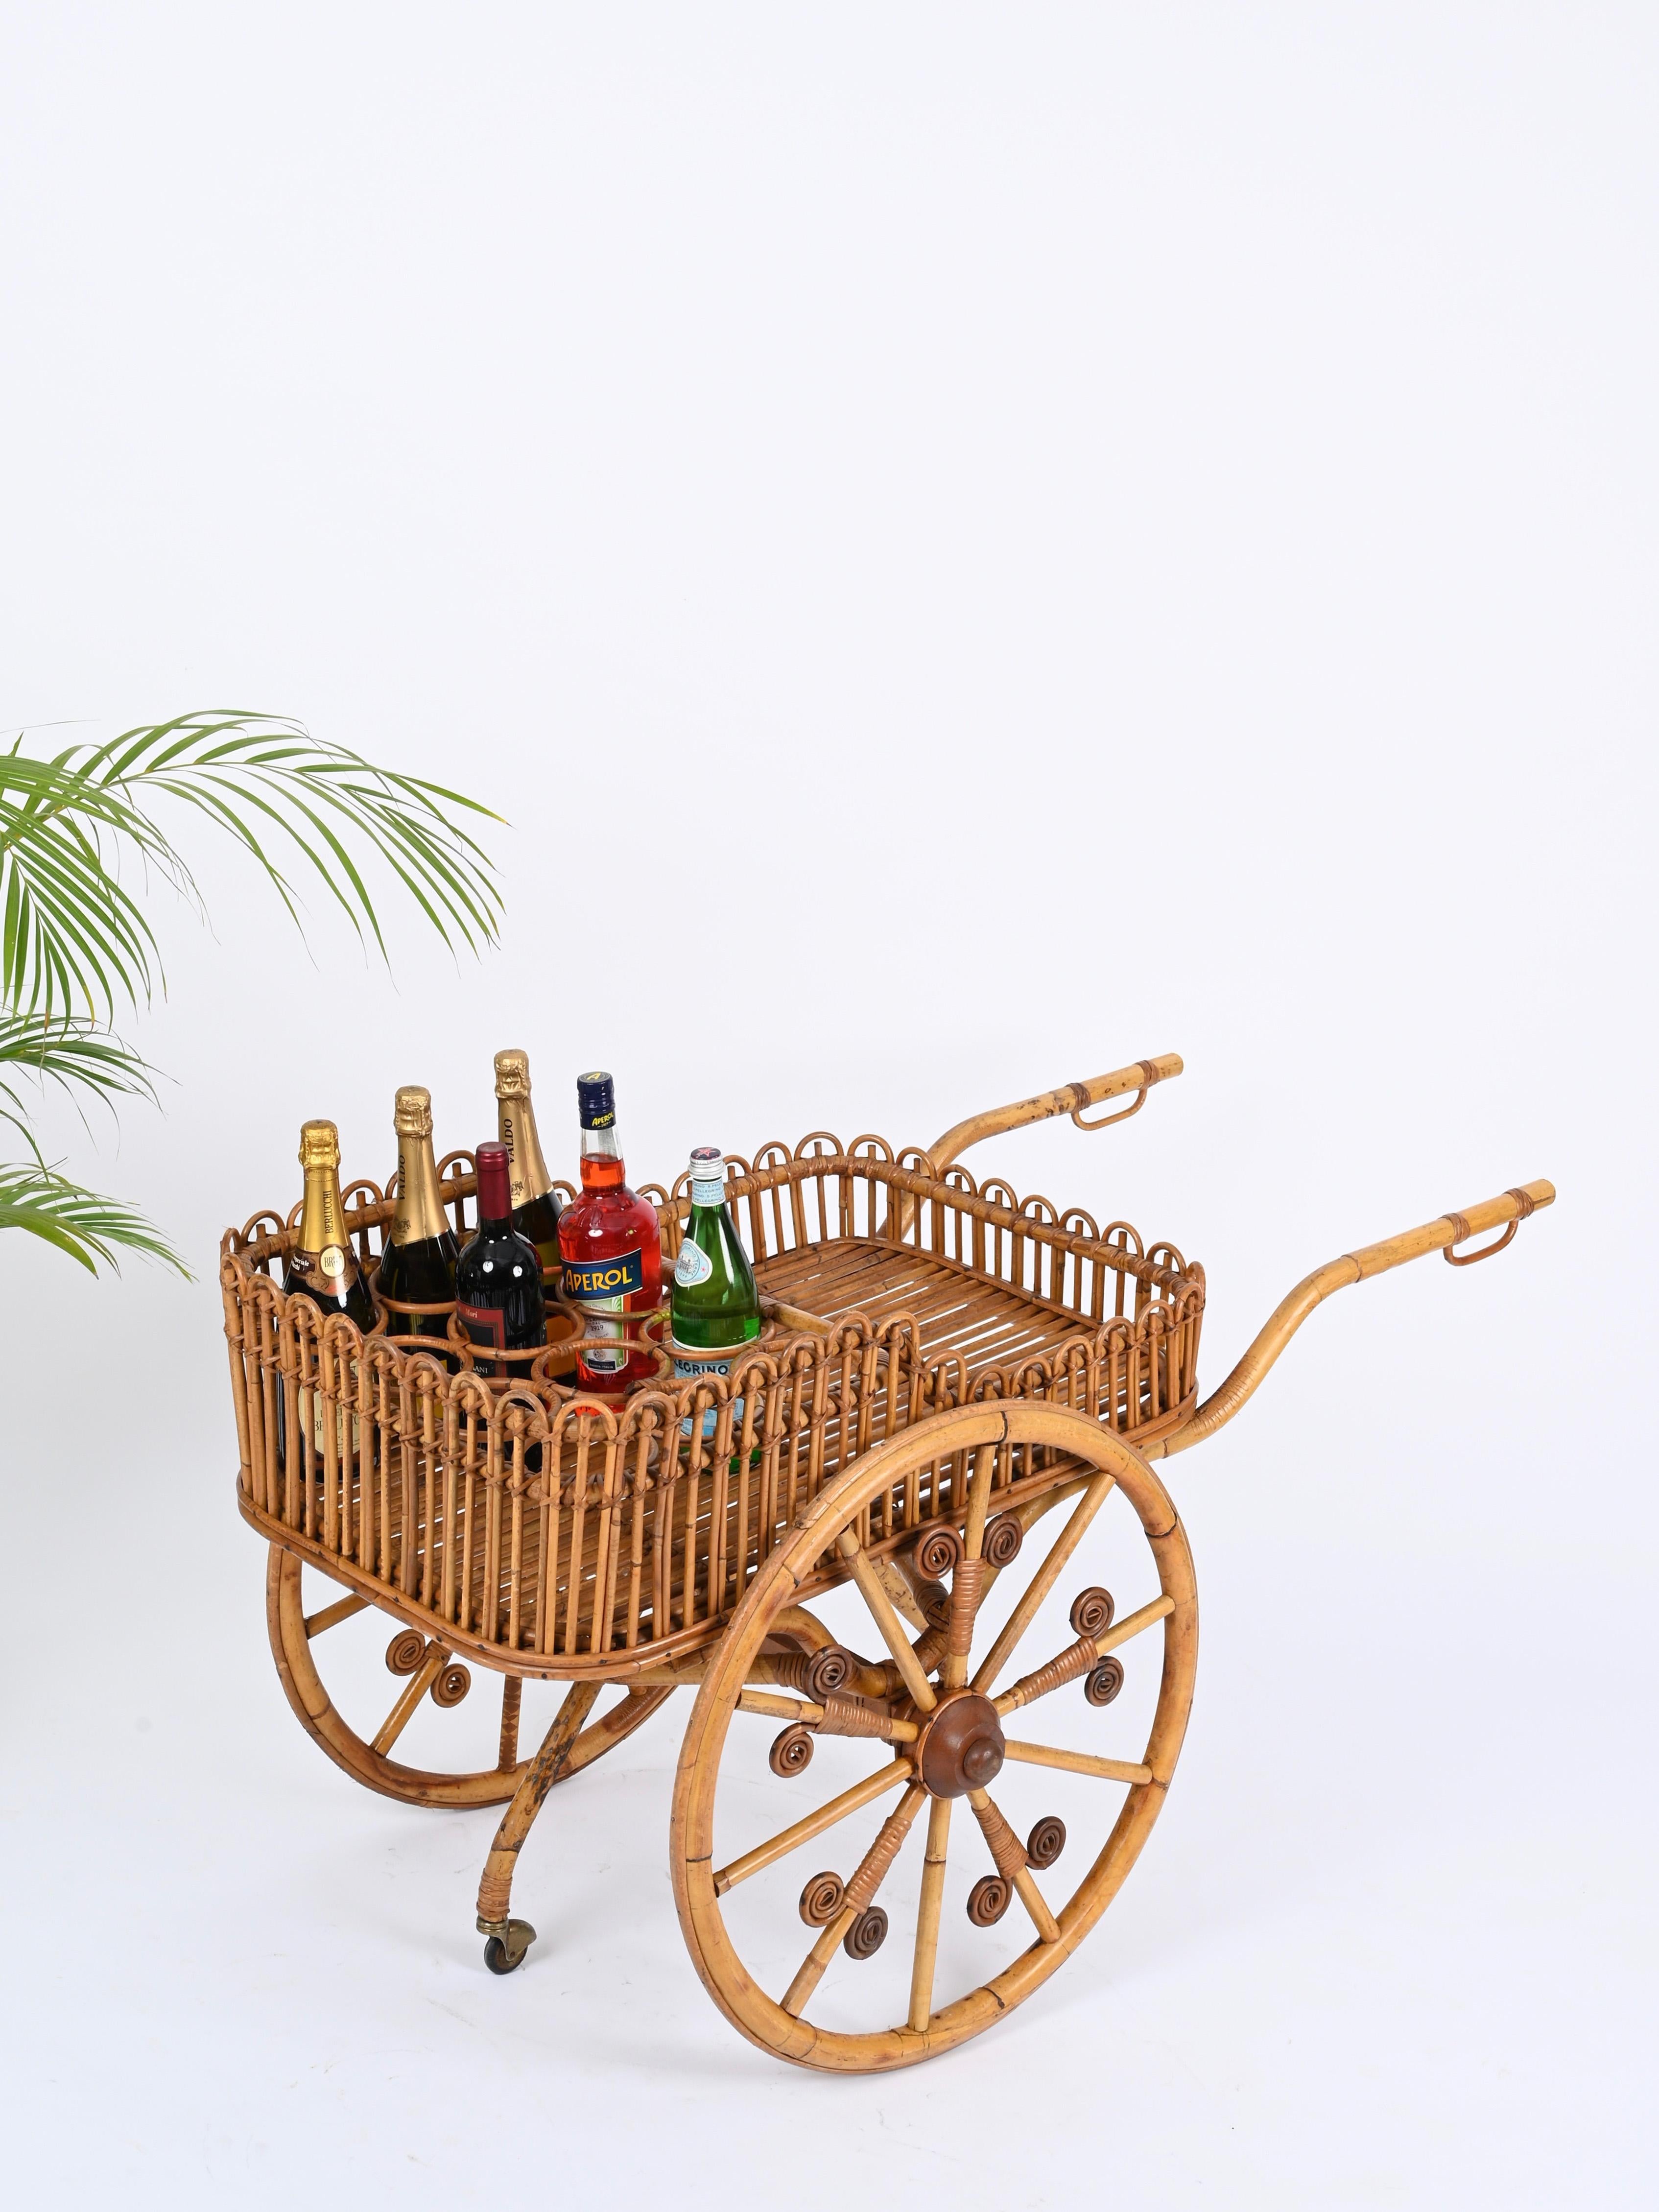 Magnificent Mid-Century French Riviera style bar cart  with bottle fully made in curved bamboo, rattan and woven wicker. This gorgeous serving bar cart was hand-made in Italy during the 1960s. 

This stunning and unique piece was fully hand-made